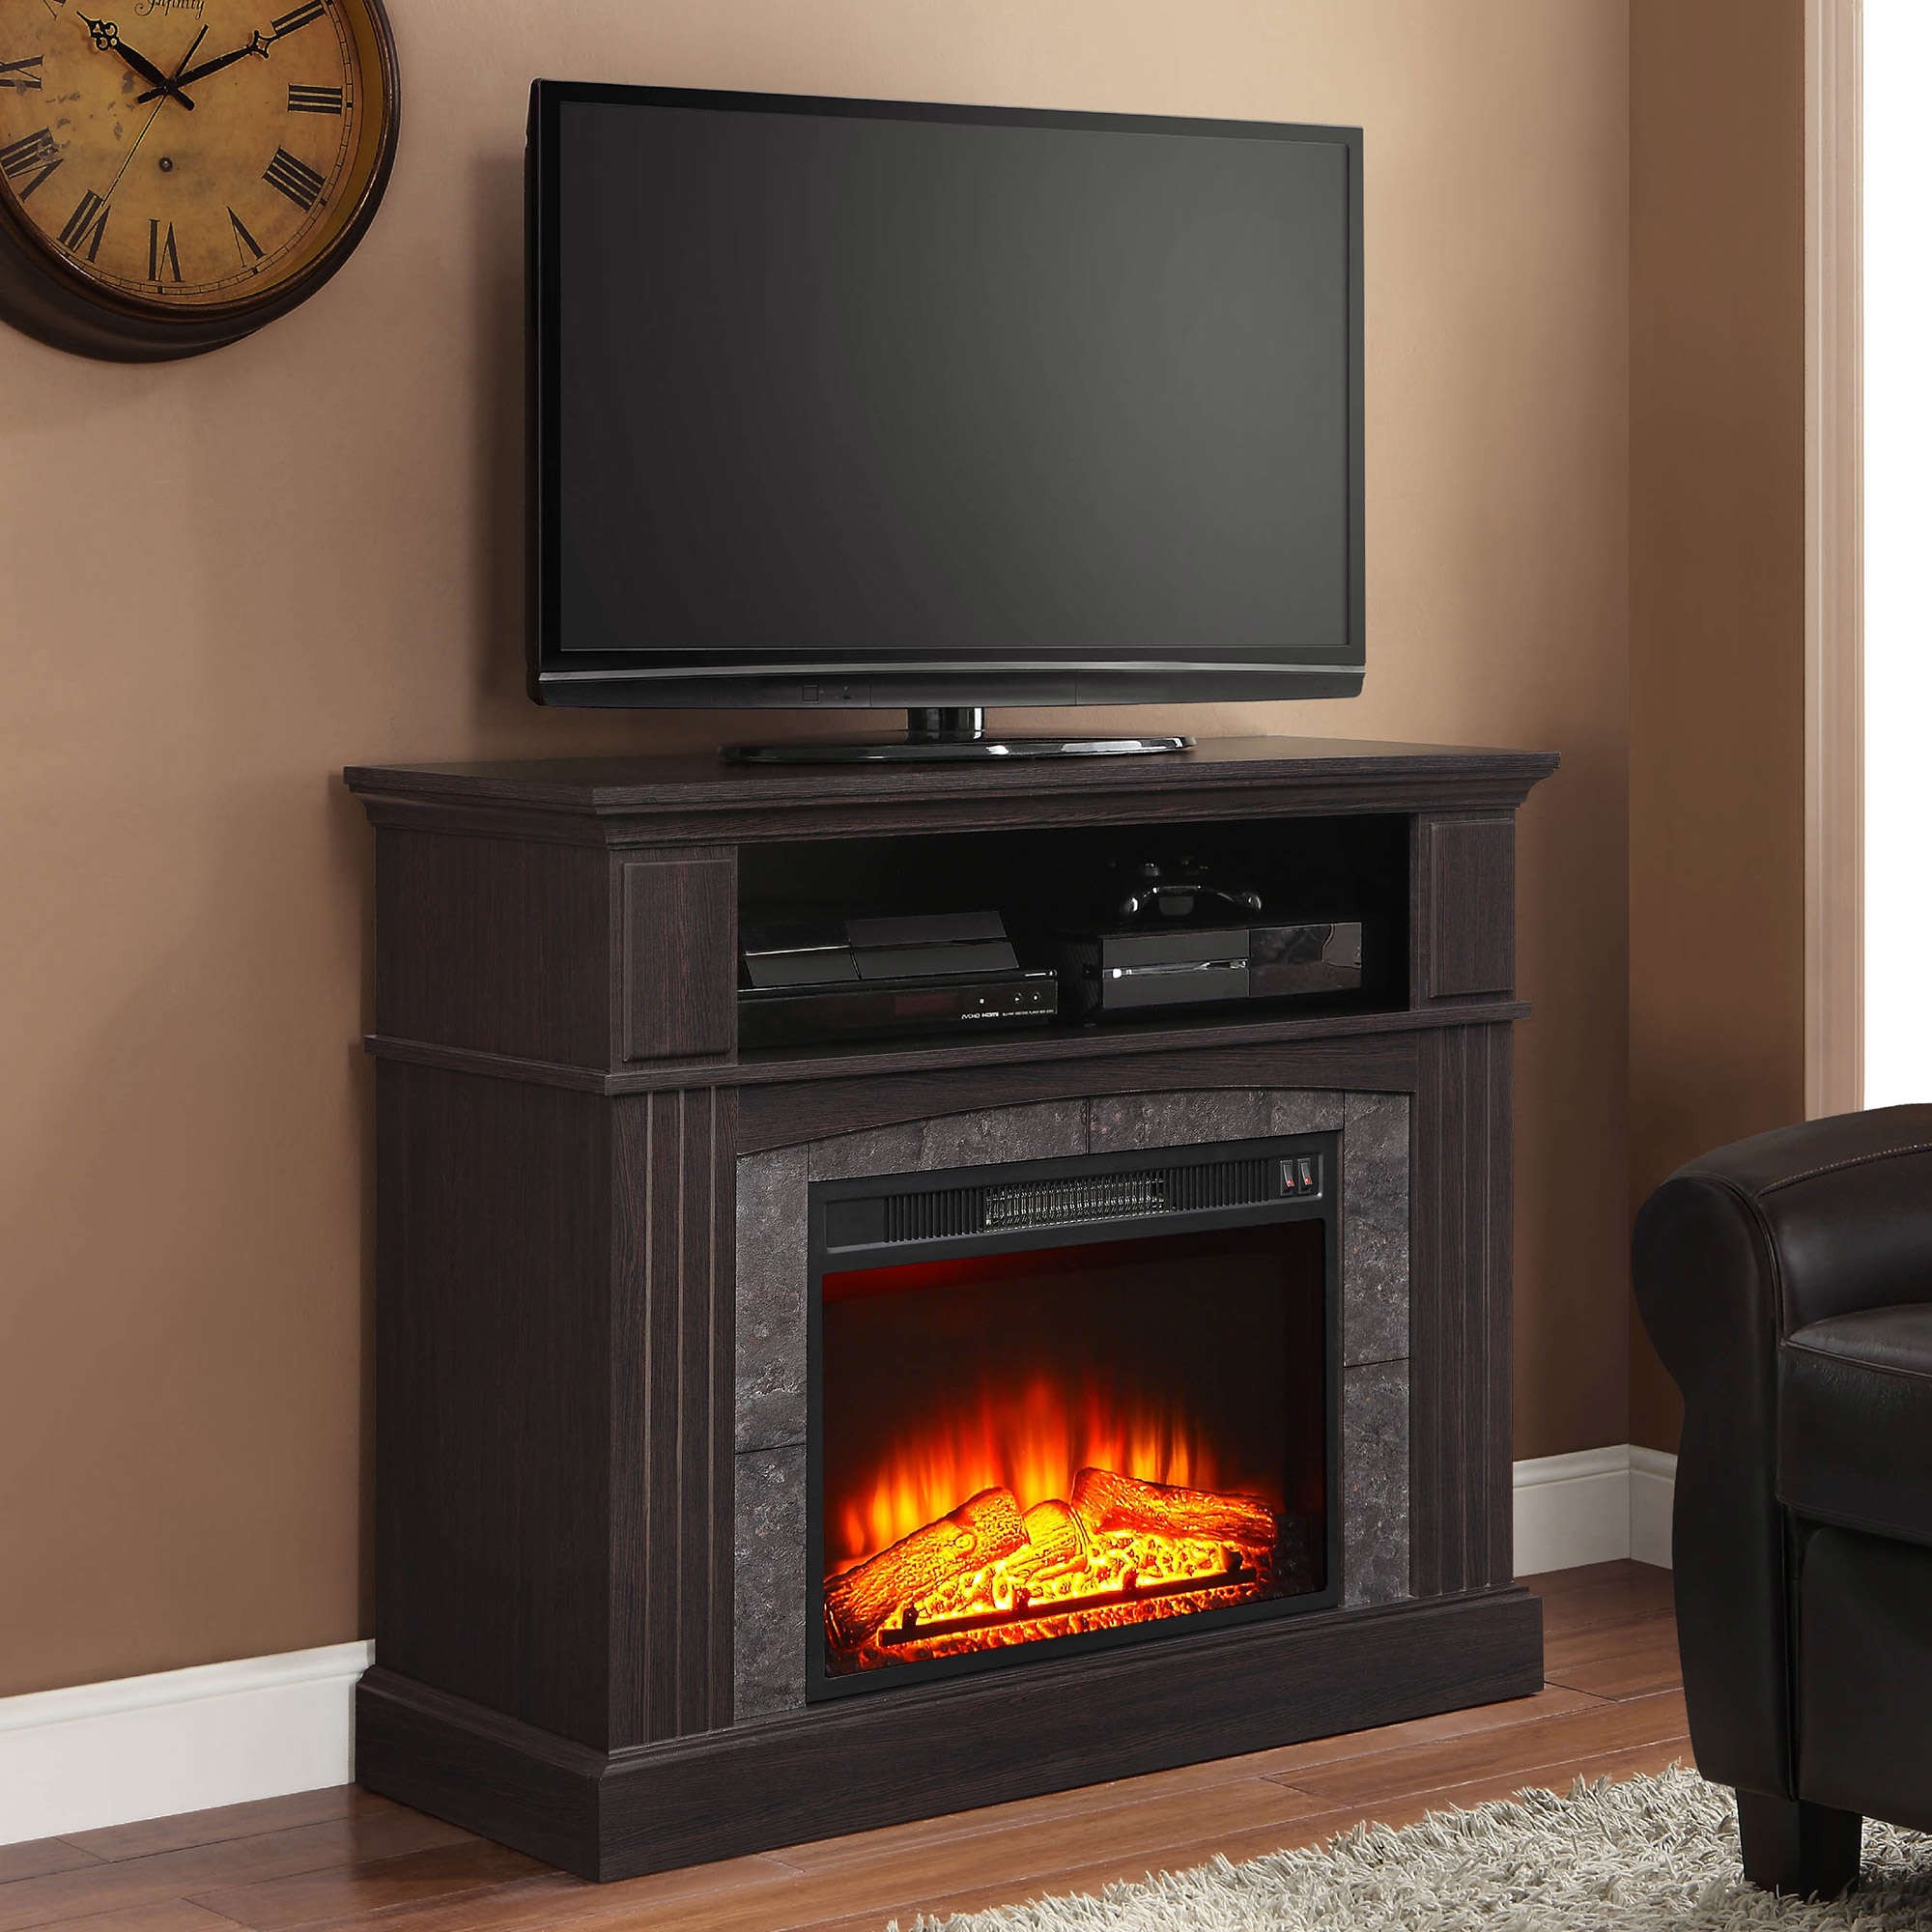 Media fireplace tv stand electric with storage for 50 inch